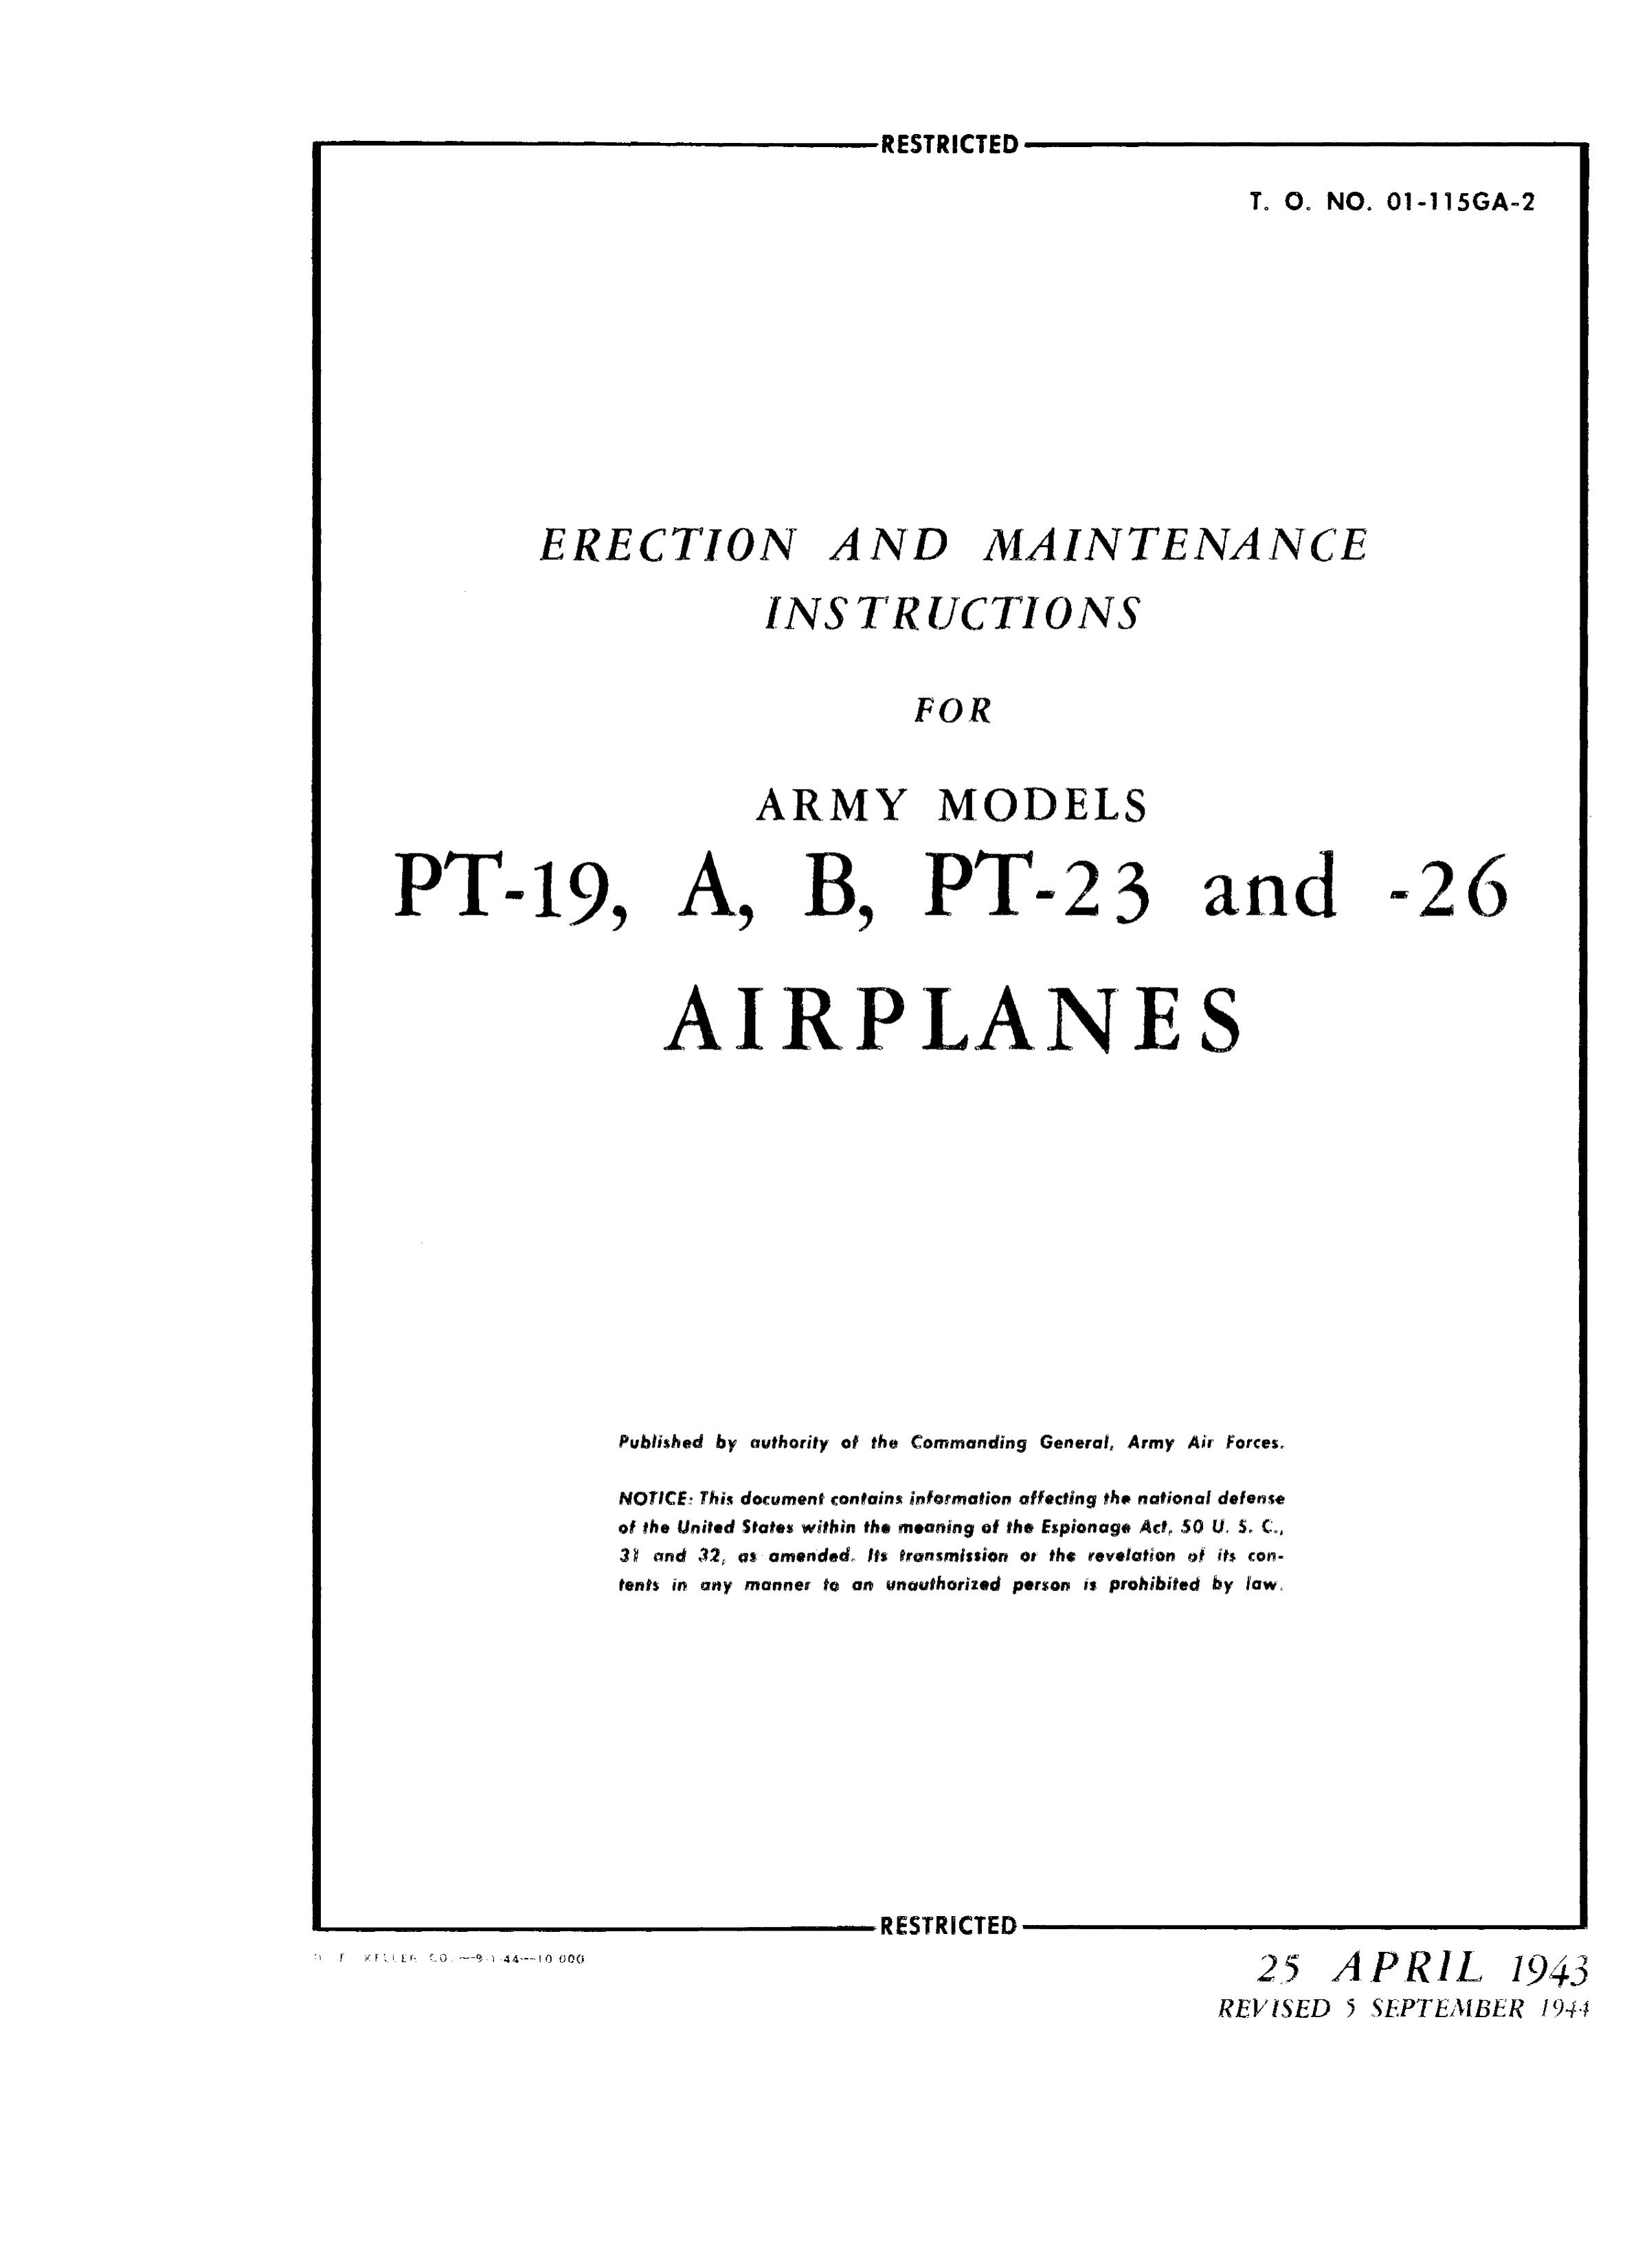 Sample page 1 from AirCorps Library document: Erection and Maintenance Instr for PT-19 Series